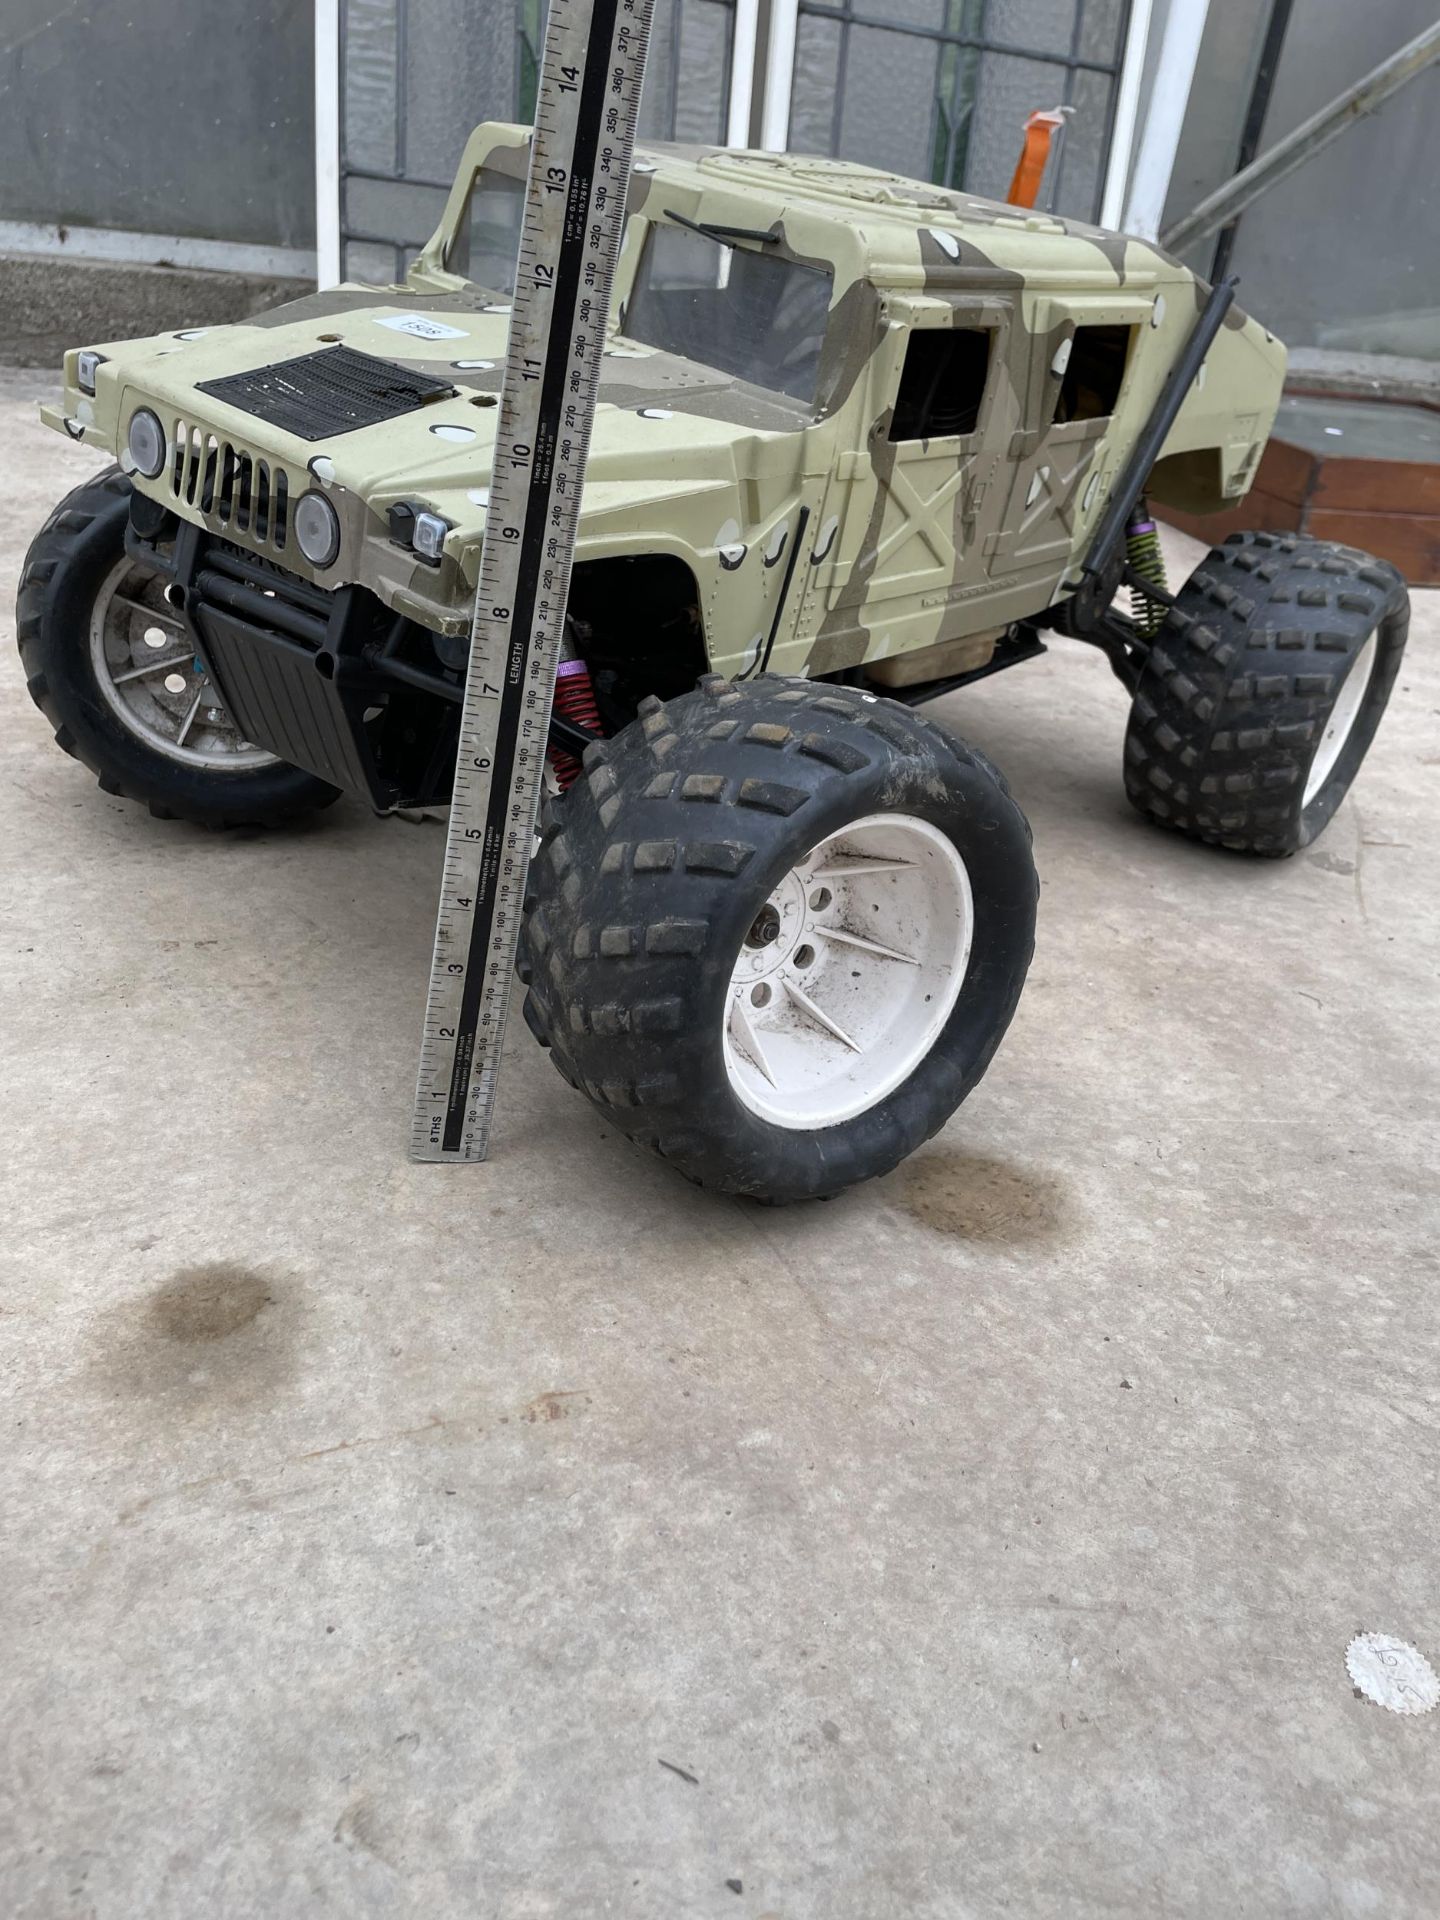 A PETROL ENGINE REMOTE CONTROL CAMMO JEEP - Image 6 of 10